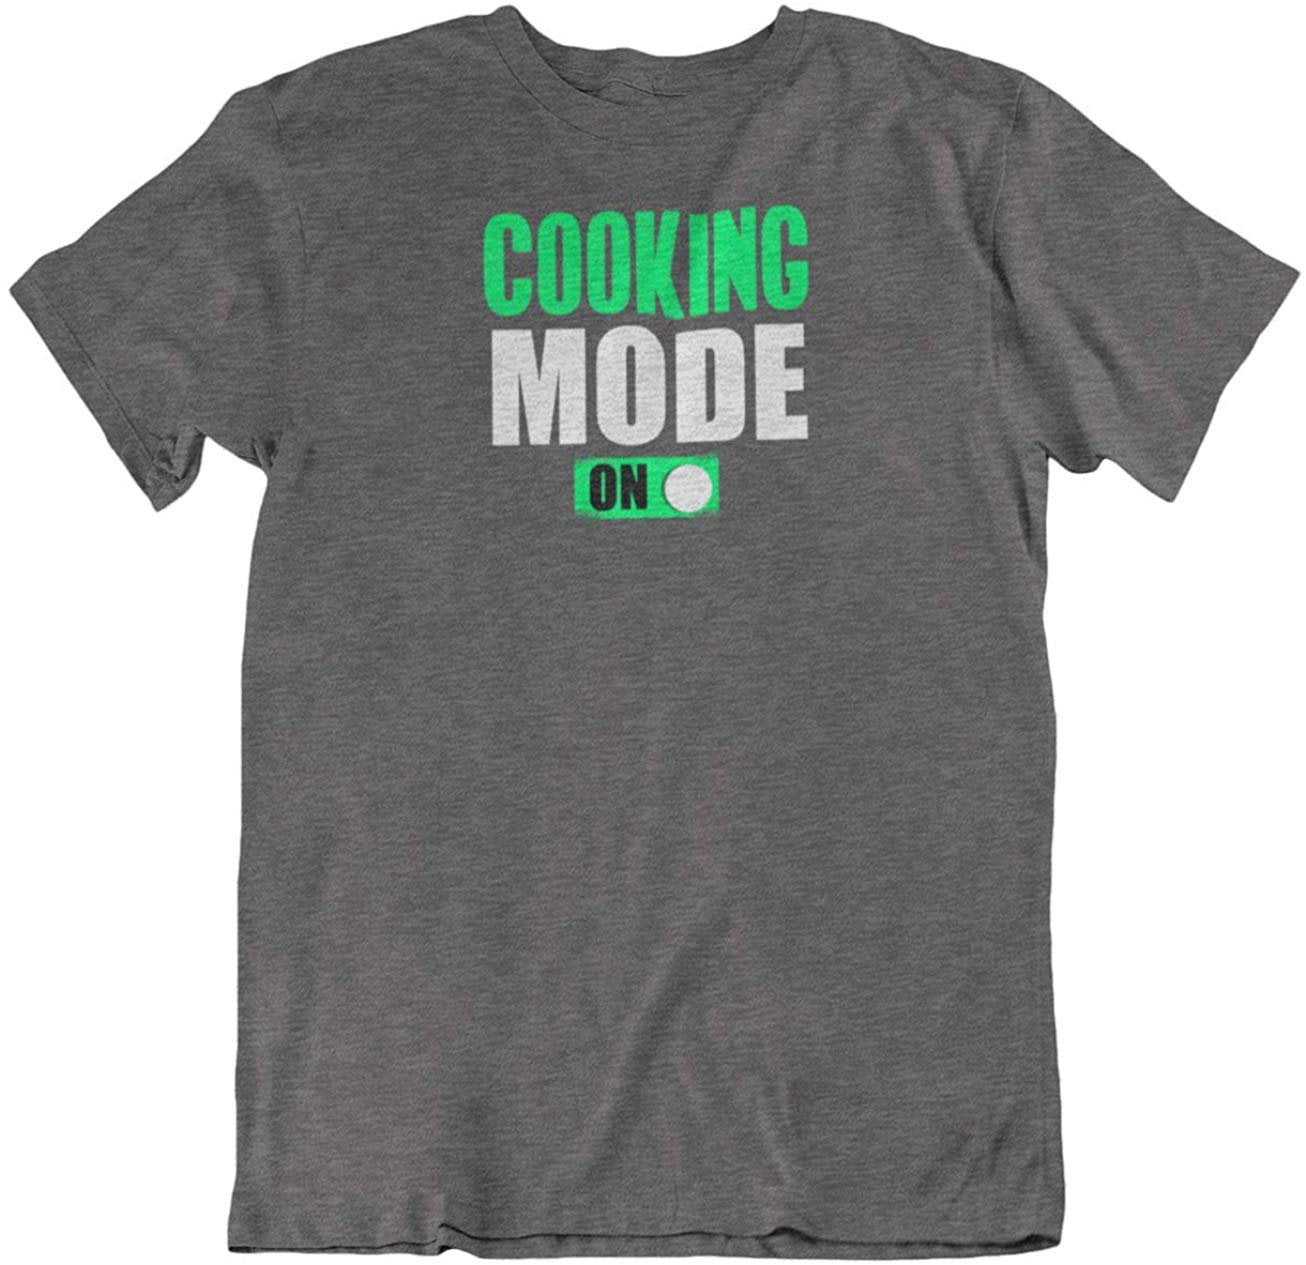 Make Your Mark Cool Fun Cooking Mode on T-Shirt Gifts for People Who Like to Cook, Men & Women Black, Men's, Size: XL